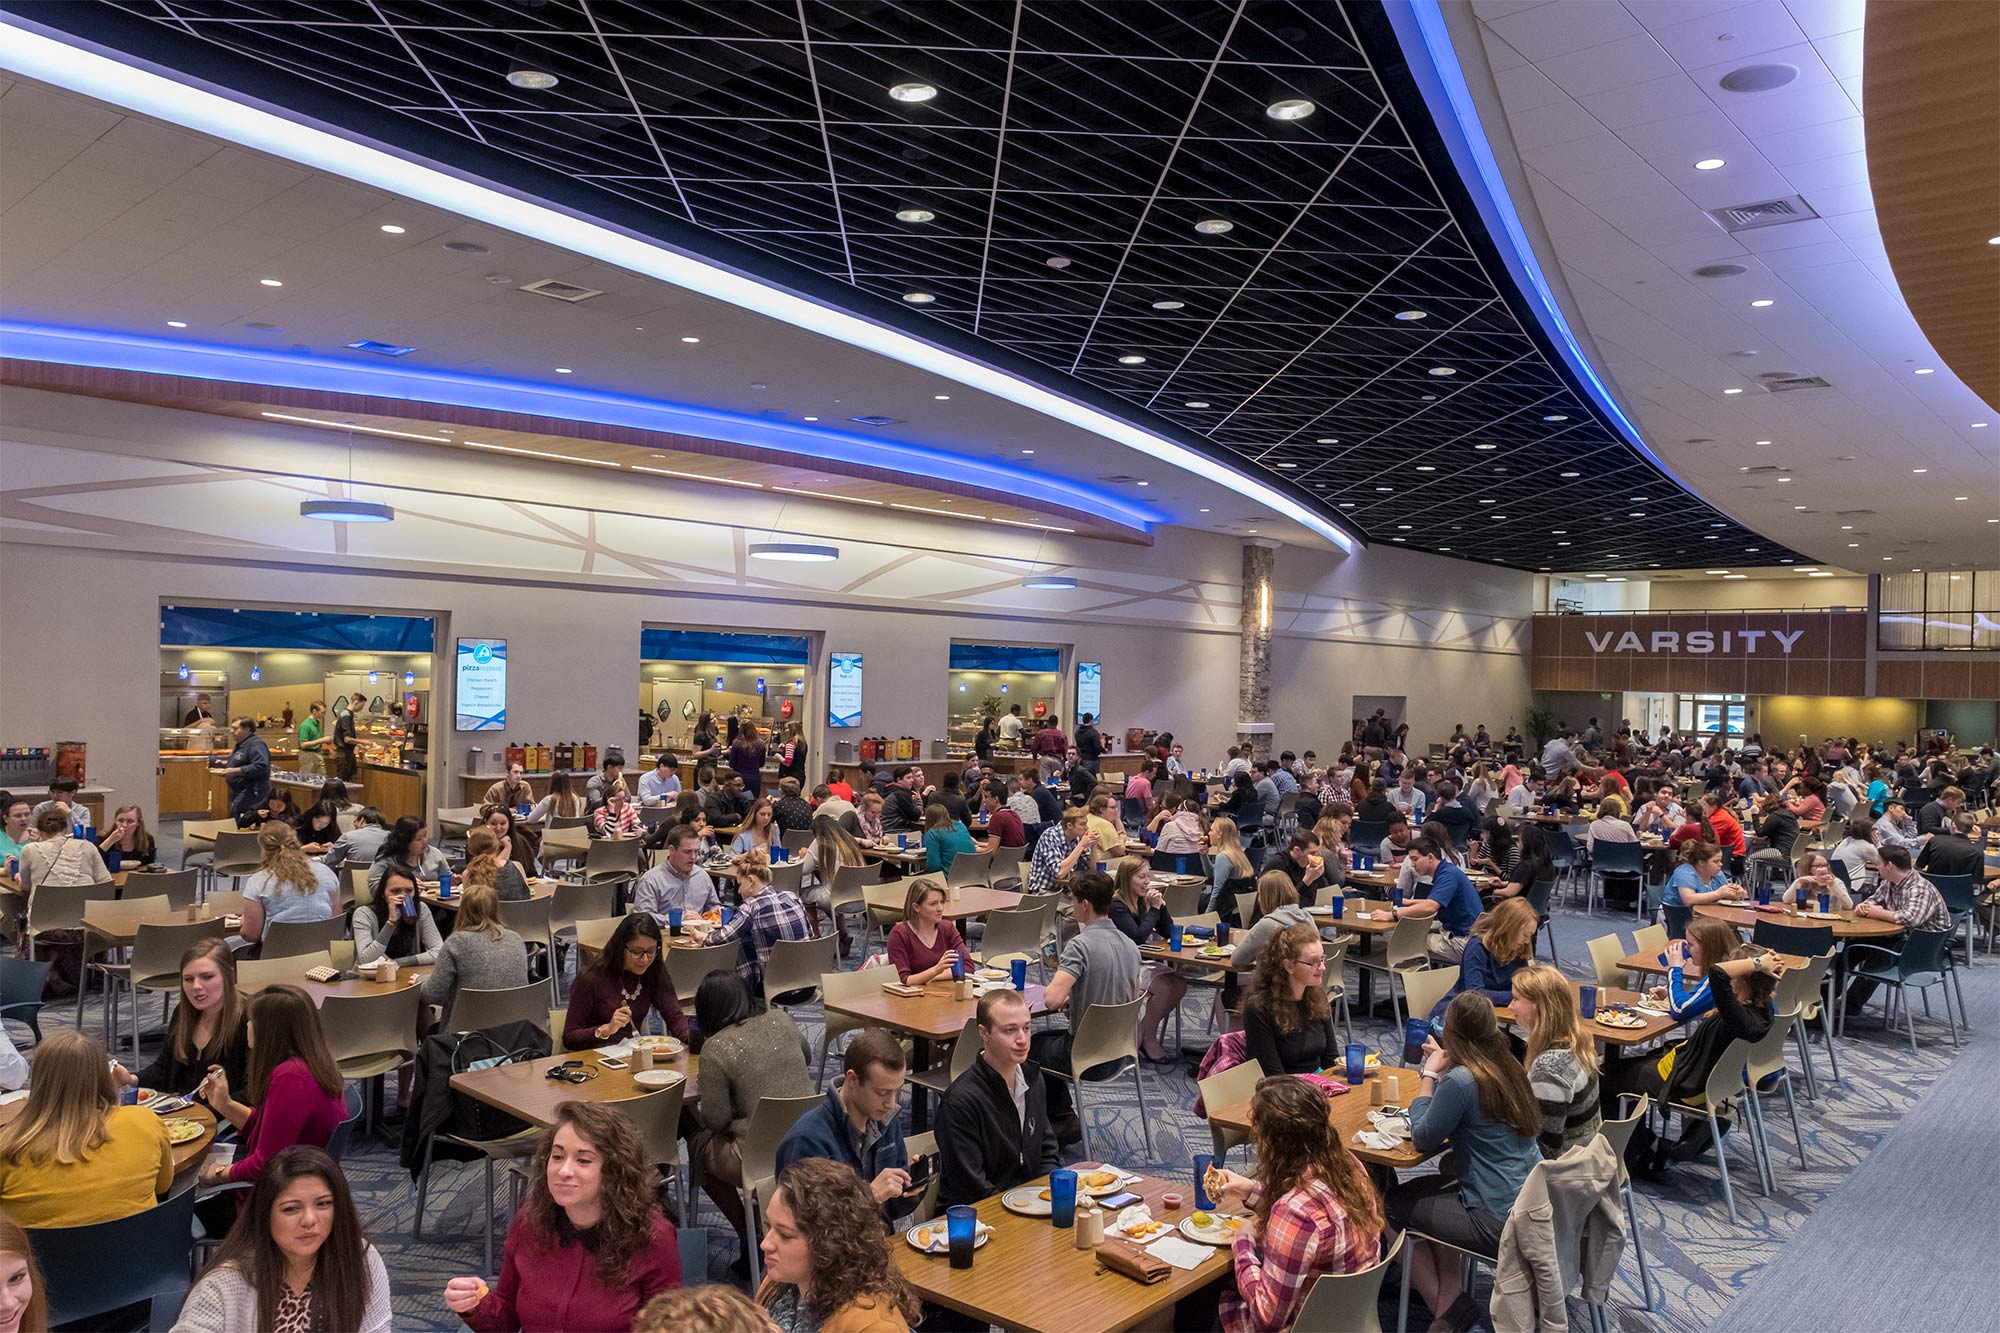 Students eating in a dining hall.